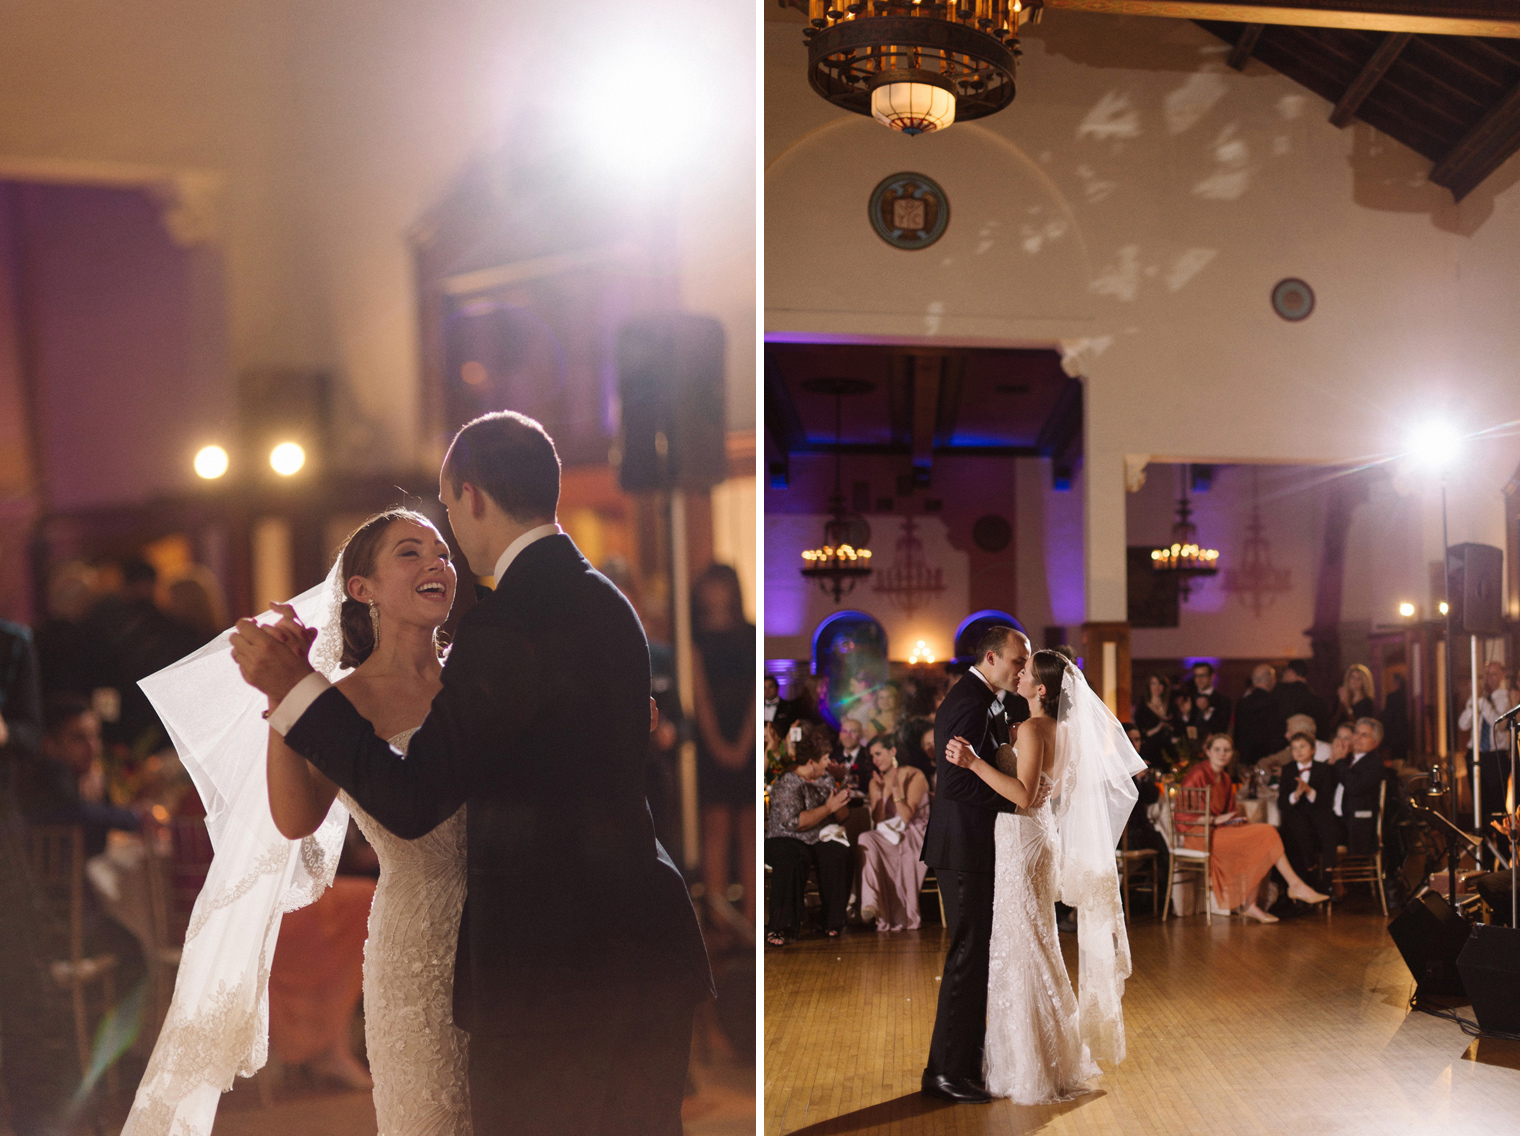 The bride and groom share their first dance at the Detroit Yacht Club wedding by Michigan photographer Heather Jowett.